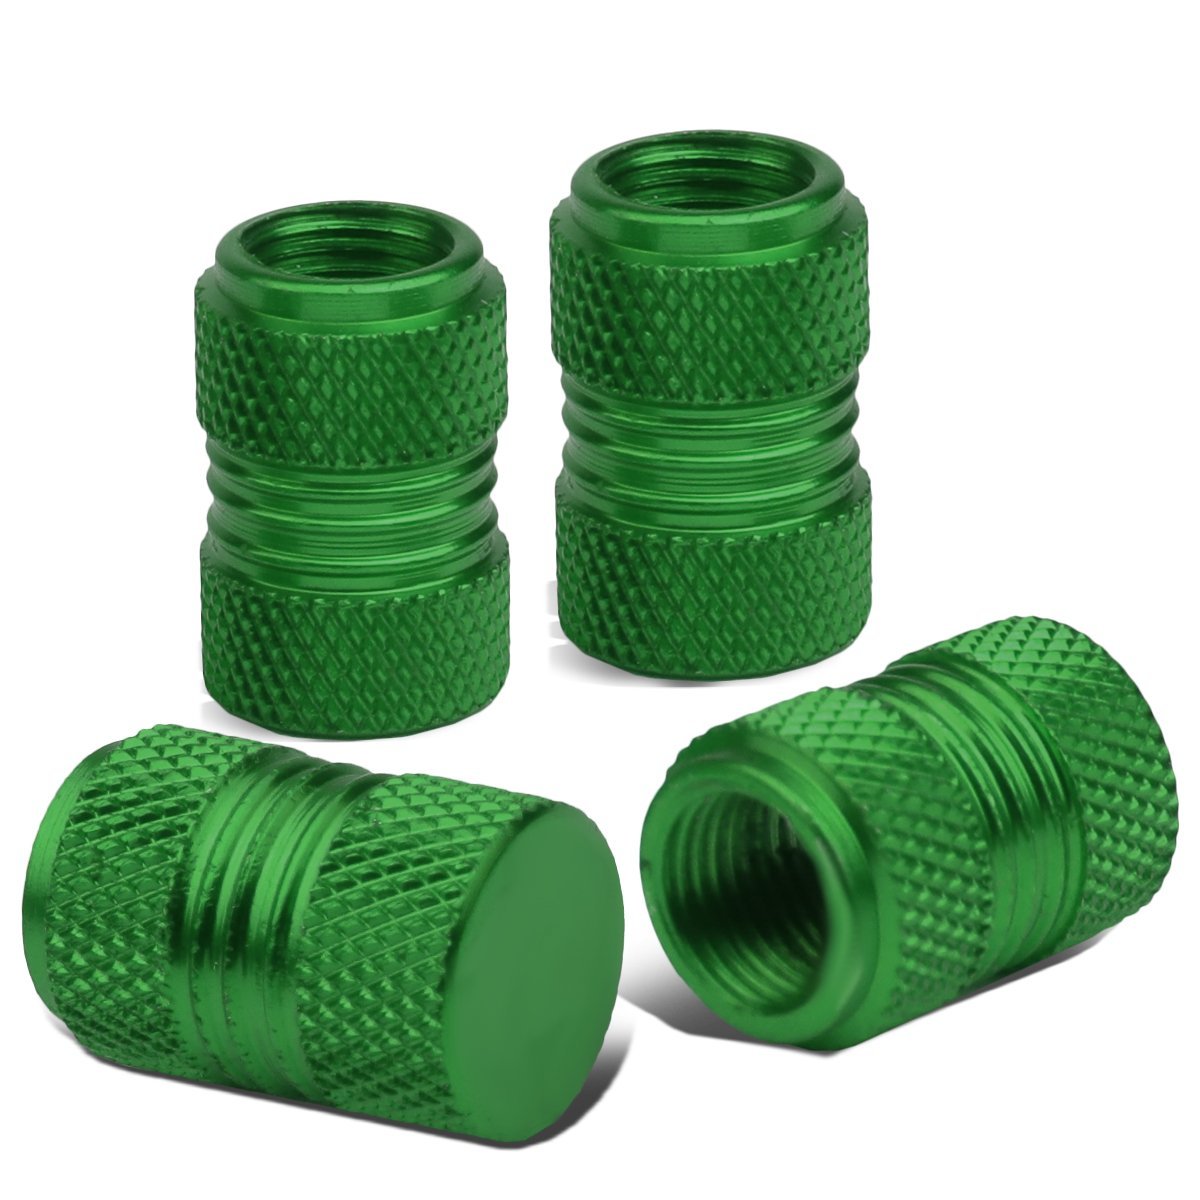 17mm Knurled Style Anodized Aluminum Green Valve Stem Caps - Click Image to Close